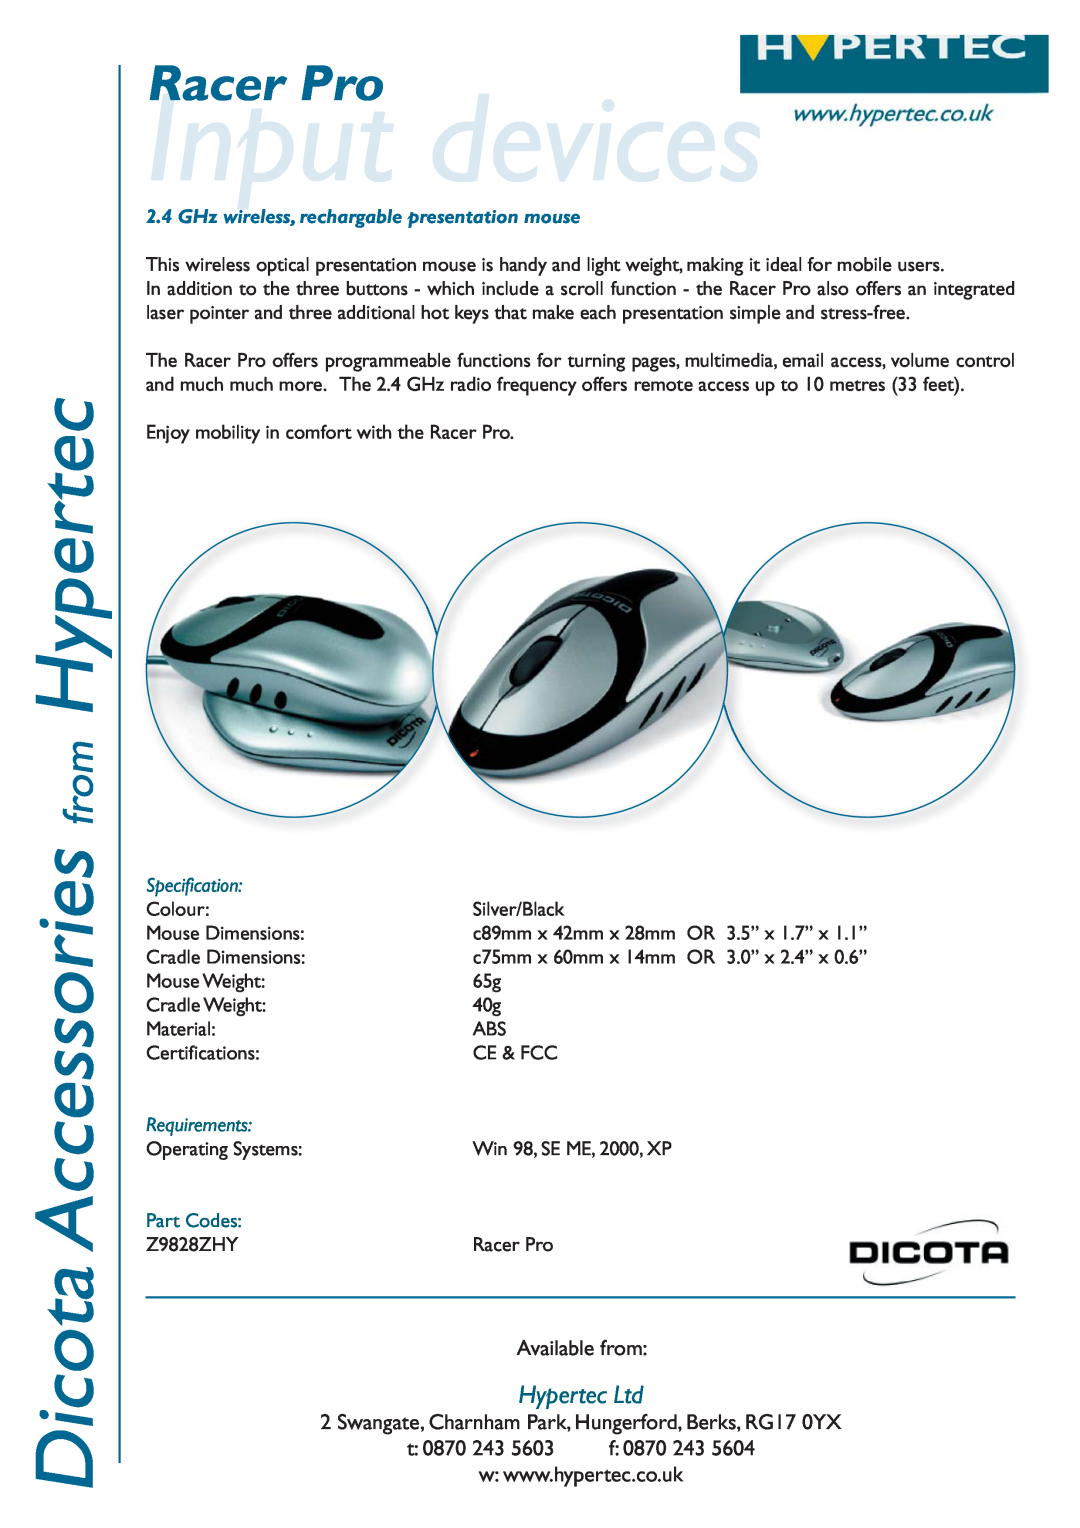 Hypertec Z9828ZHY dimensions Input devices, Dicota Accessories from Hypertec, Racer Pro, Available from, t 0870 243 